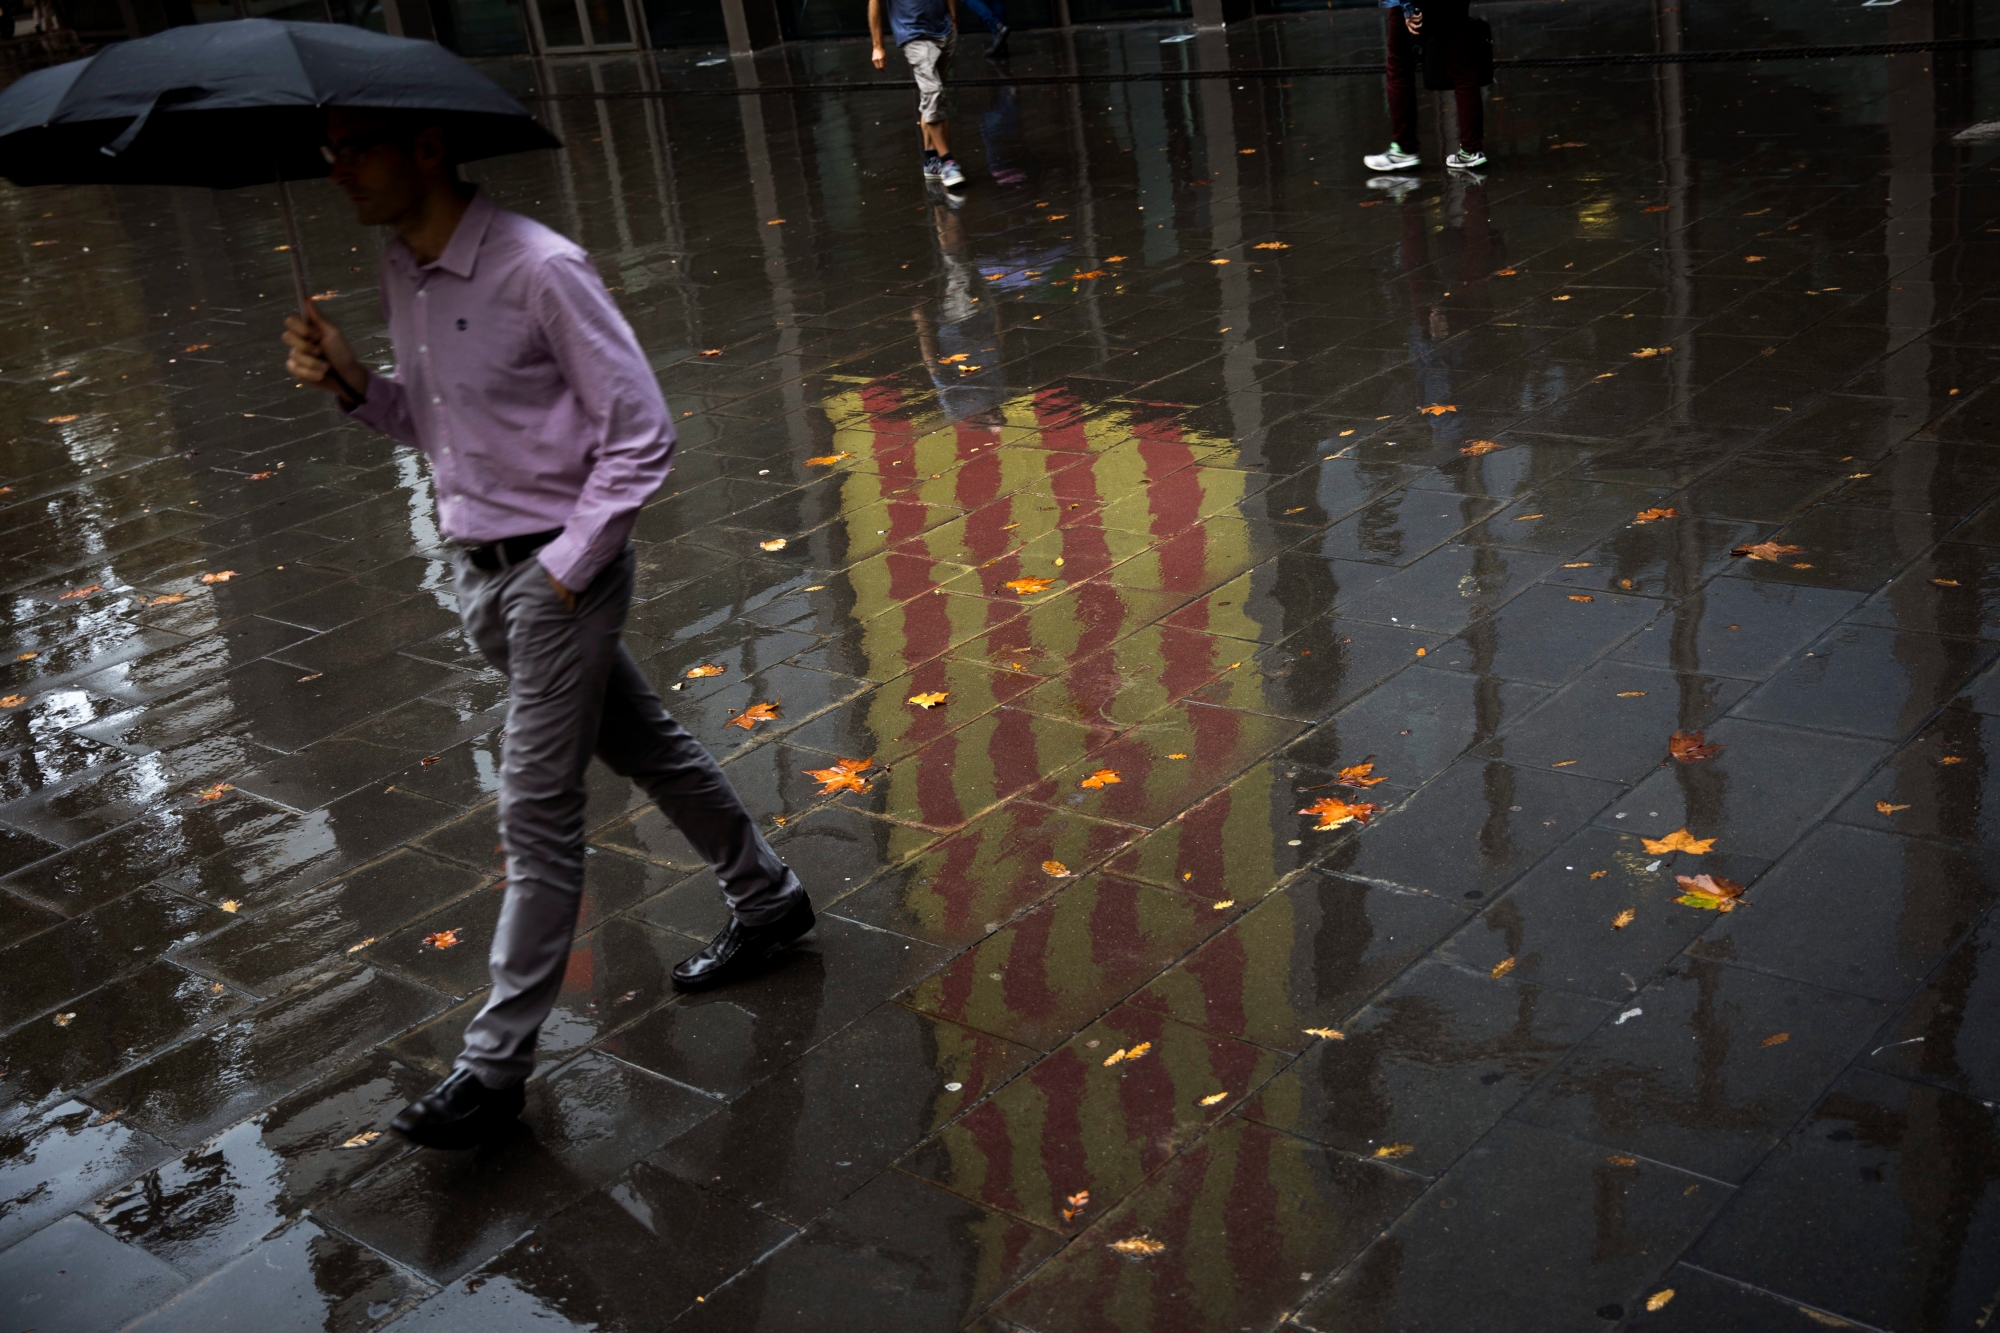 People walk past a Catalan flag reflected on the wet ground in Barcelona, Spain, Thursday, Oct. 19, 2017. Spain's government on Thursday immediately rejected a threat by Catalonia's leader to declare independence unless talks are held, calling a special Cabinet session for the weekend to activate measures to take control of the region's semi-autonomous powers. (AP Photo/Emilio Morenatti) Spain Catalonia